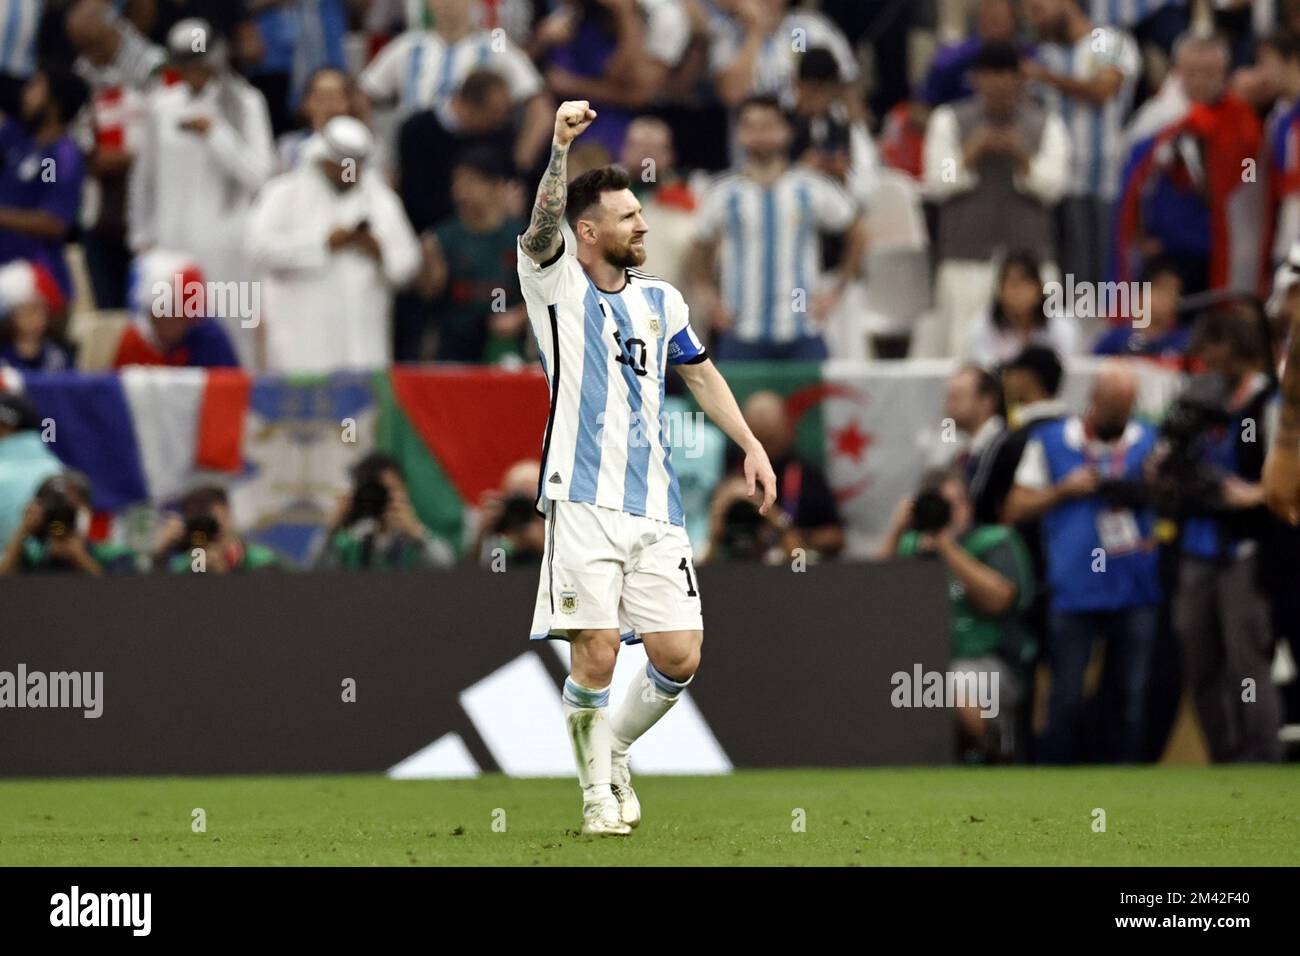 AL DAAYEN - Lionel Messi of Argentina celebrates the 1-0 during the FIFA World Cup Qatar 2022 final match between Argentina and France at Lusail Stadium on December 18, 2022 in Al Daayen, Qatar. AP | Dutch Height | MAURICE OF STONE Stock Photo